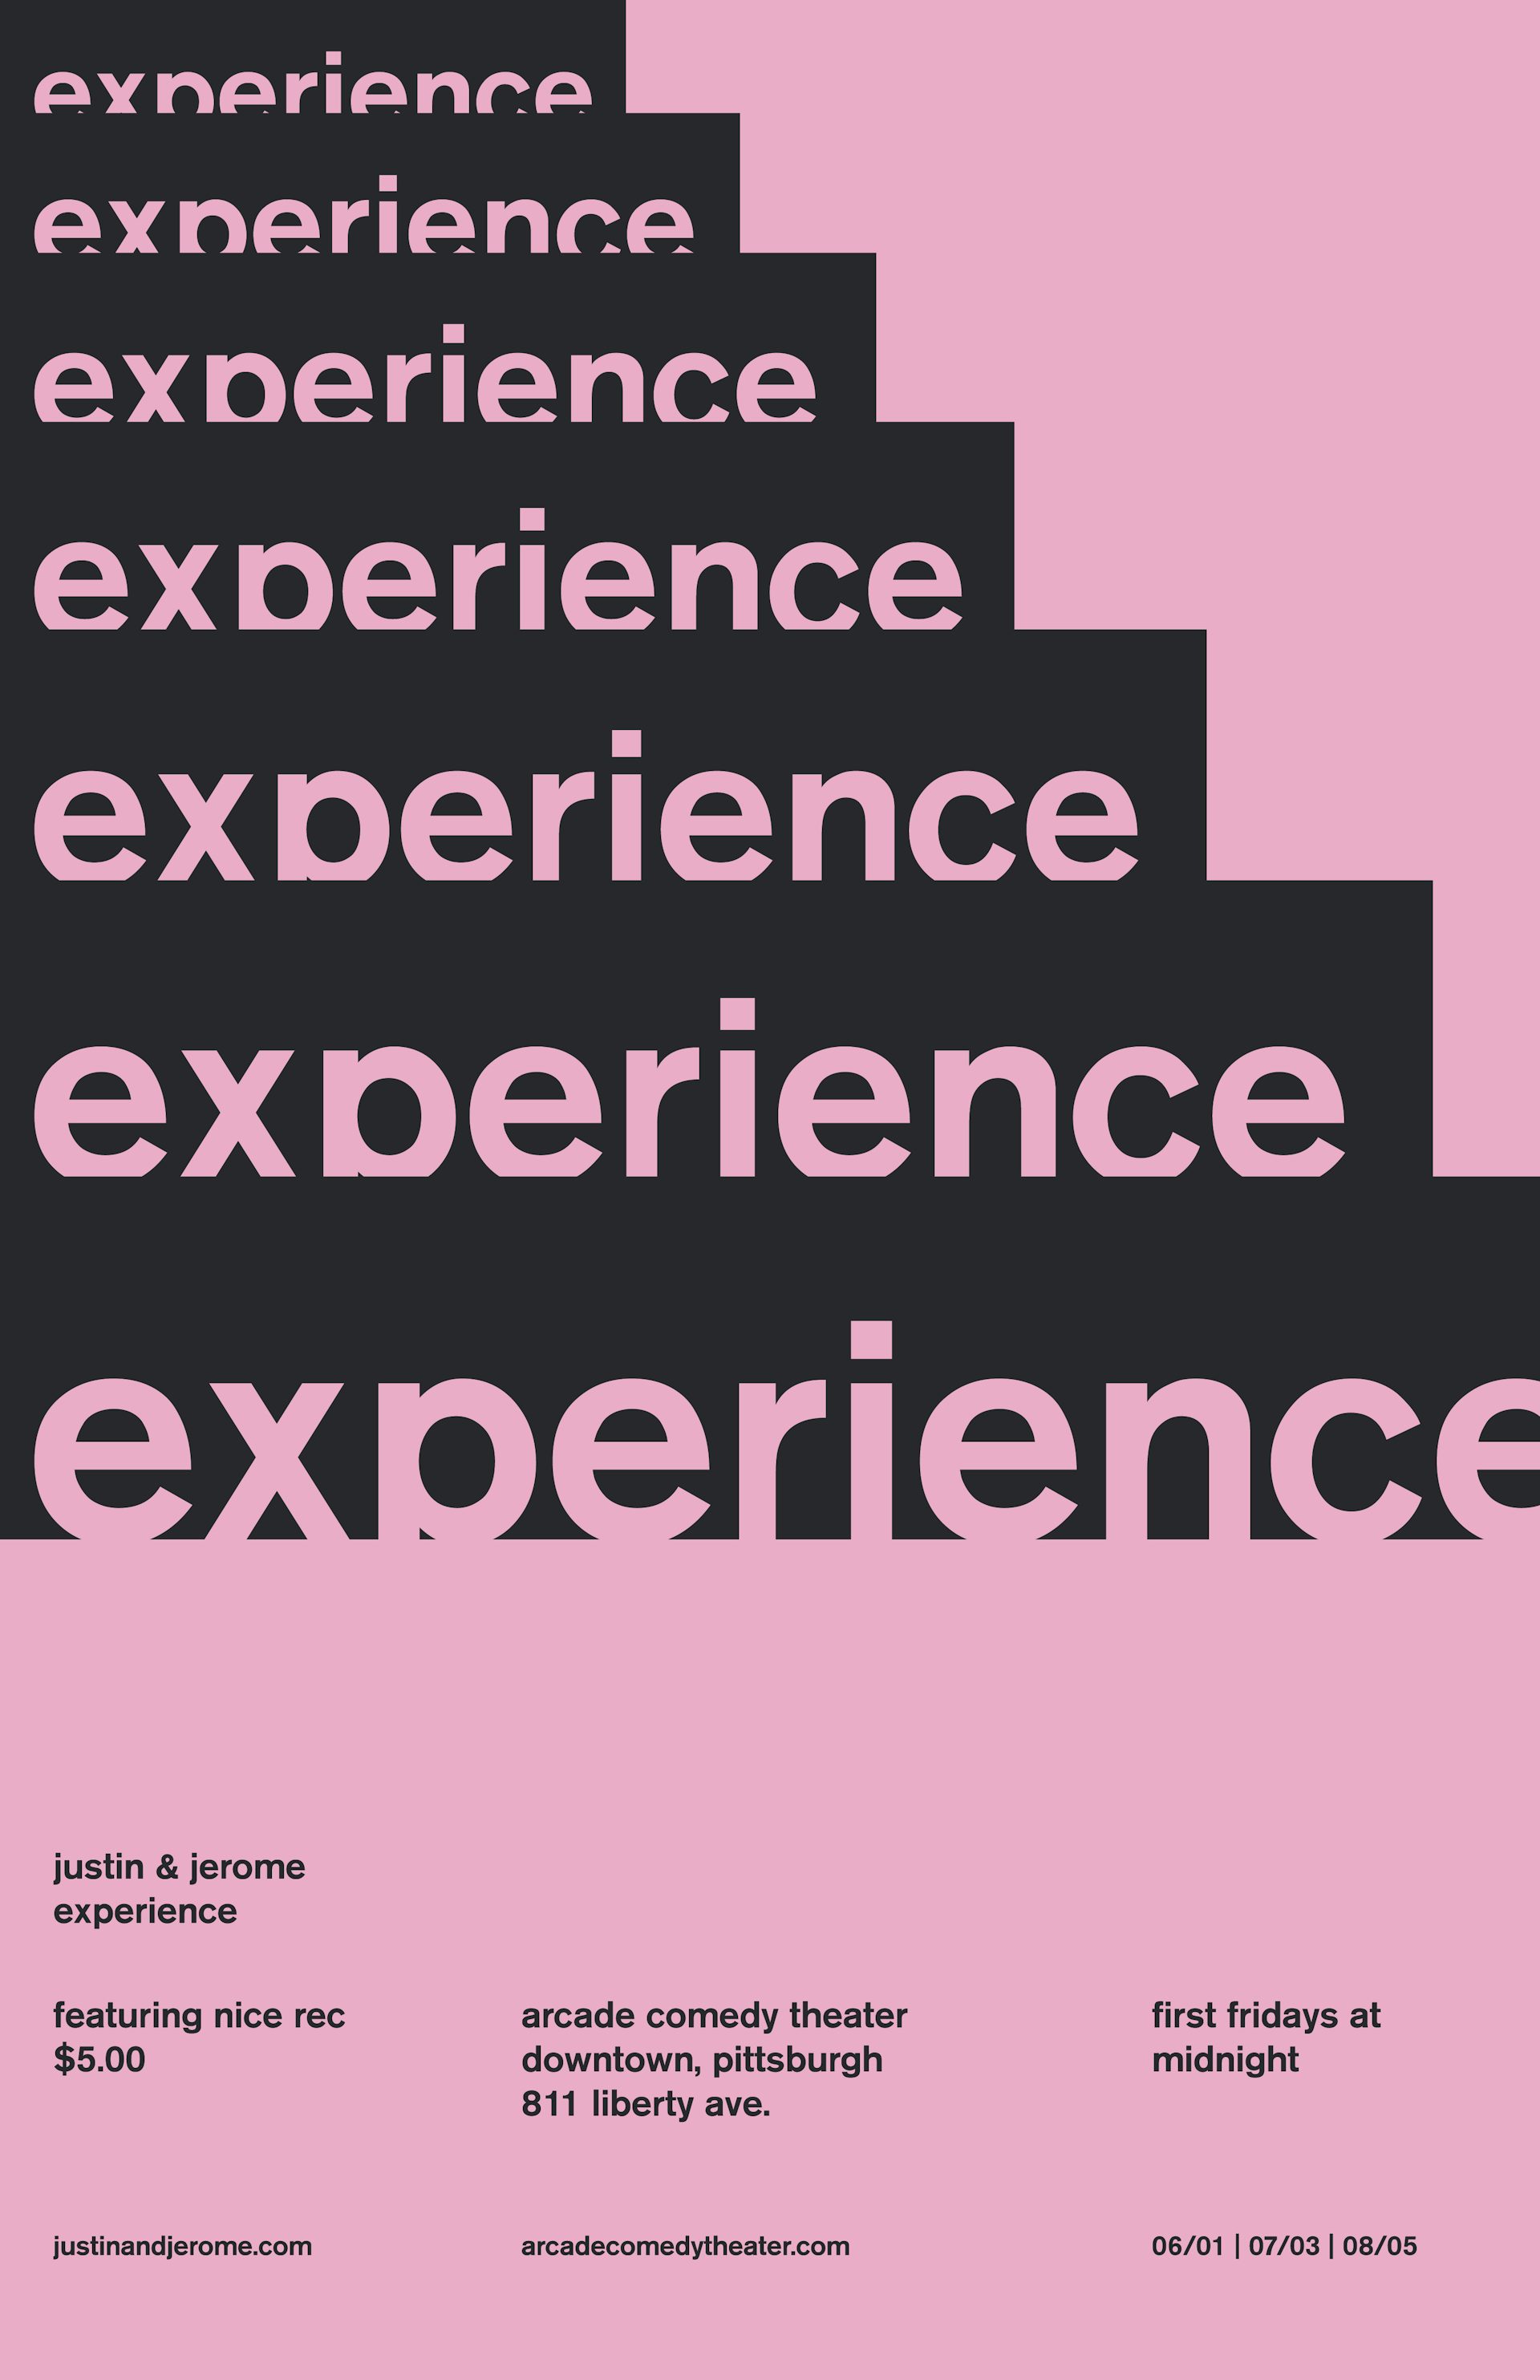 A show poster for JJE. It has a pink background with the word “Experience” repeating it coming more into focus until it takes up the entire width of the poster. The word “experience” has a black background and pink text so it looks like steps kind of. Below is a grid of text information with show details.